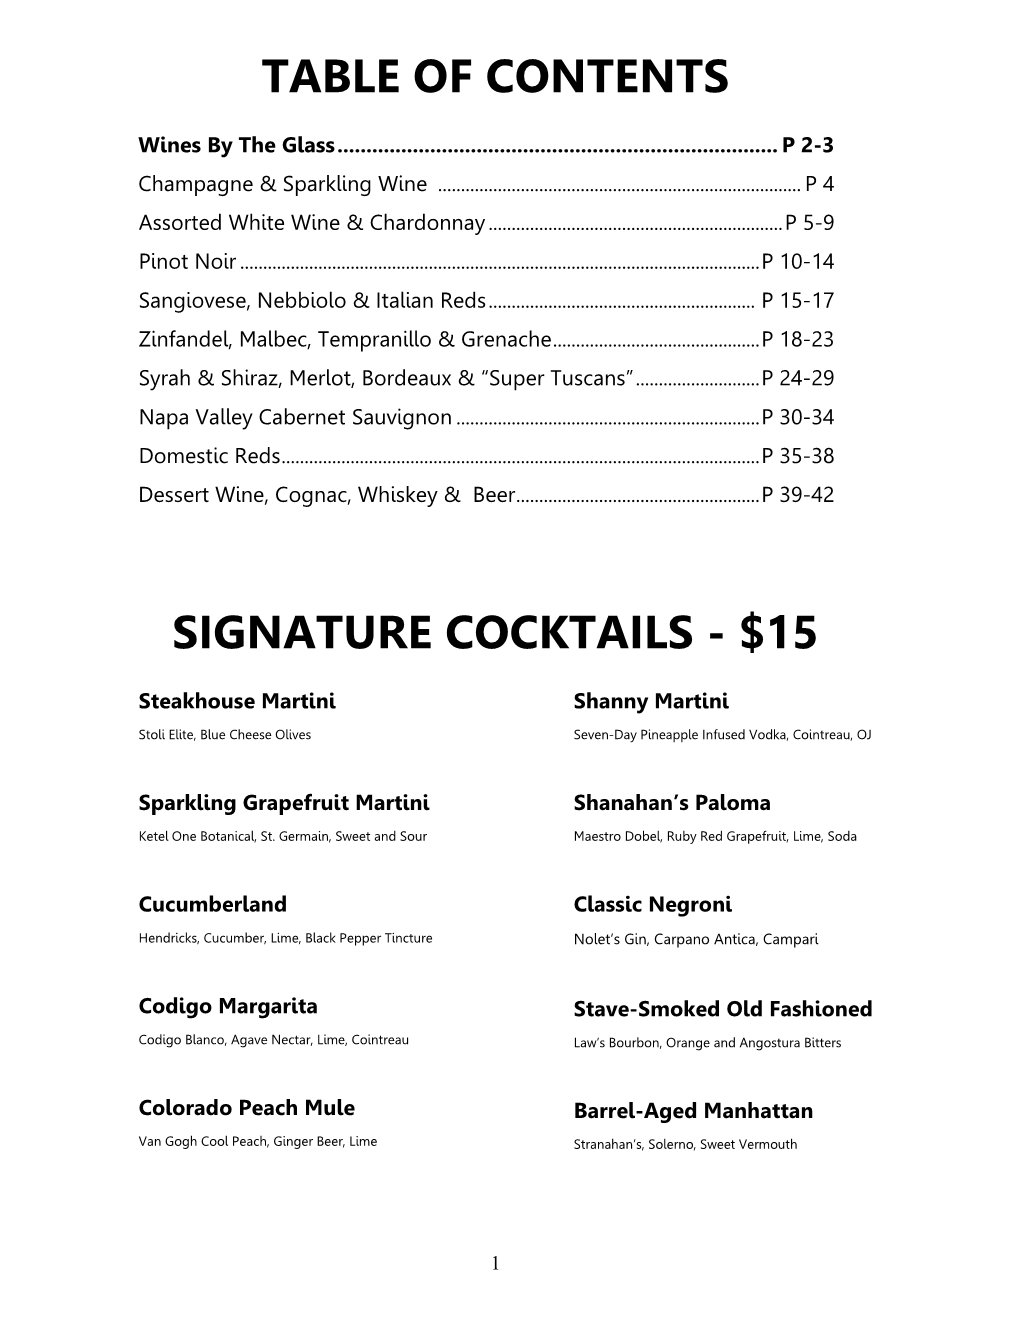 Table of Contents Signature Cocktails